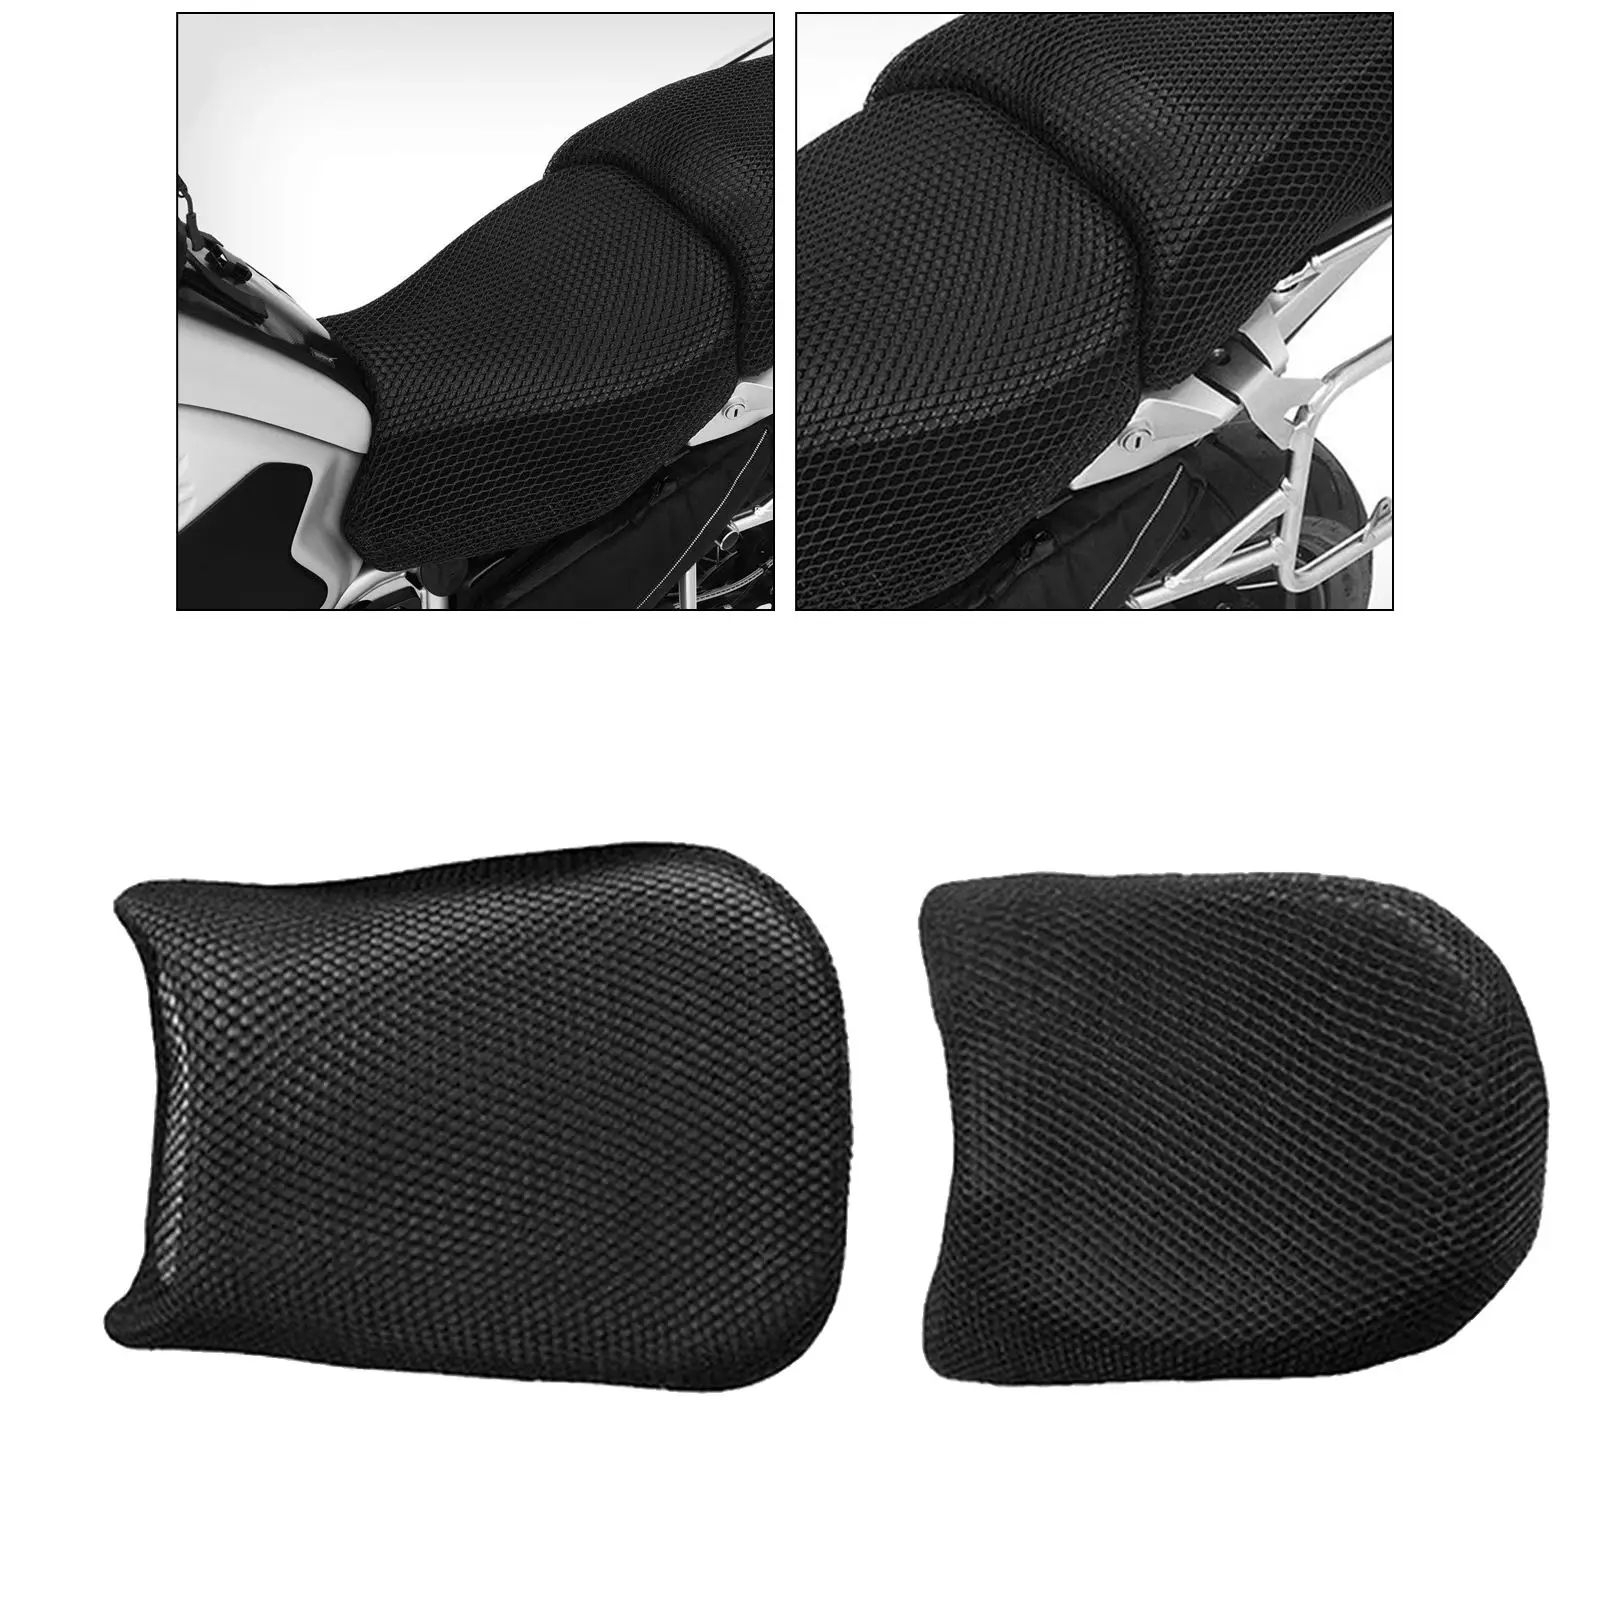 Motorbike Sport Motorcycle 3D Saddle Seat Cushions  Covers Pressure Relief Accessories For  R1200GS